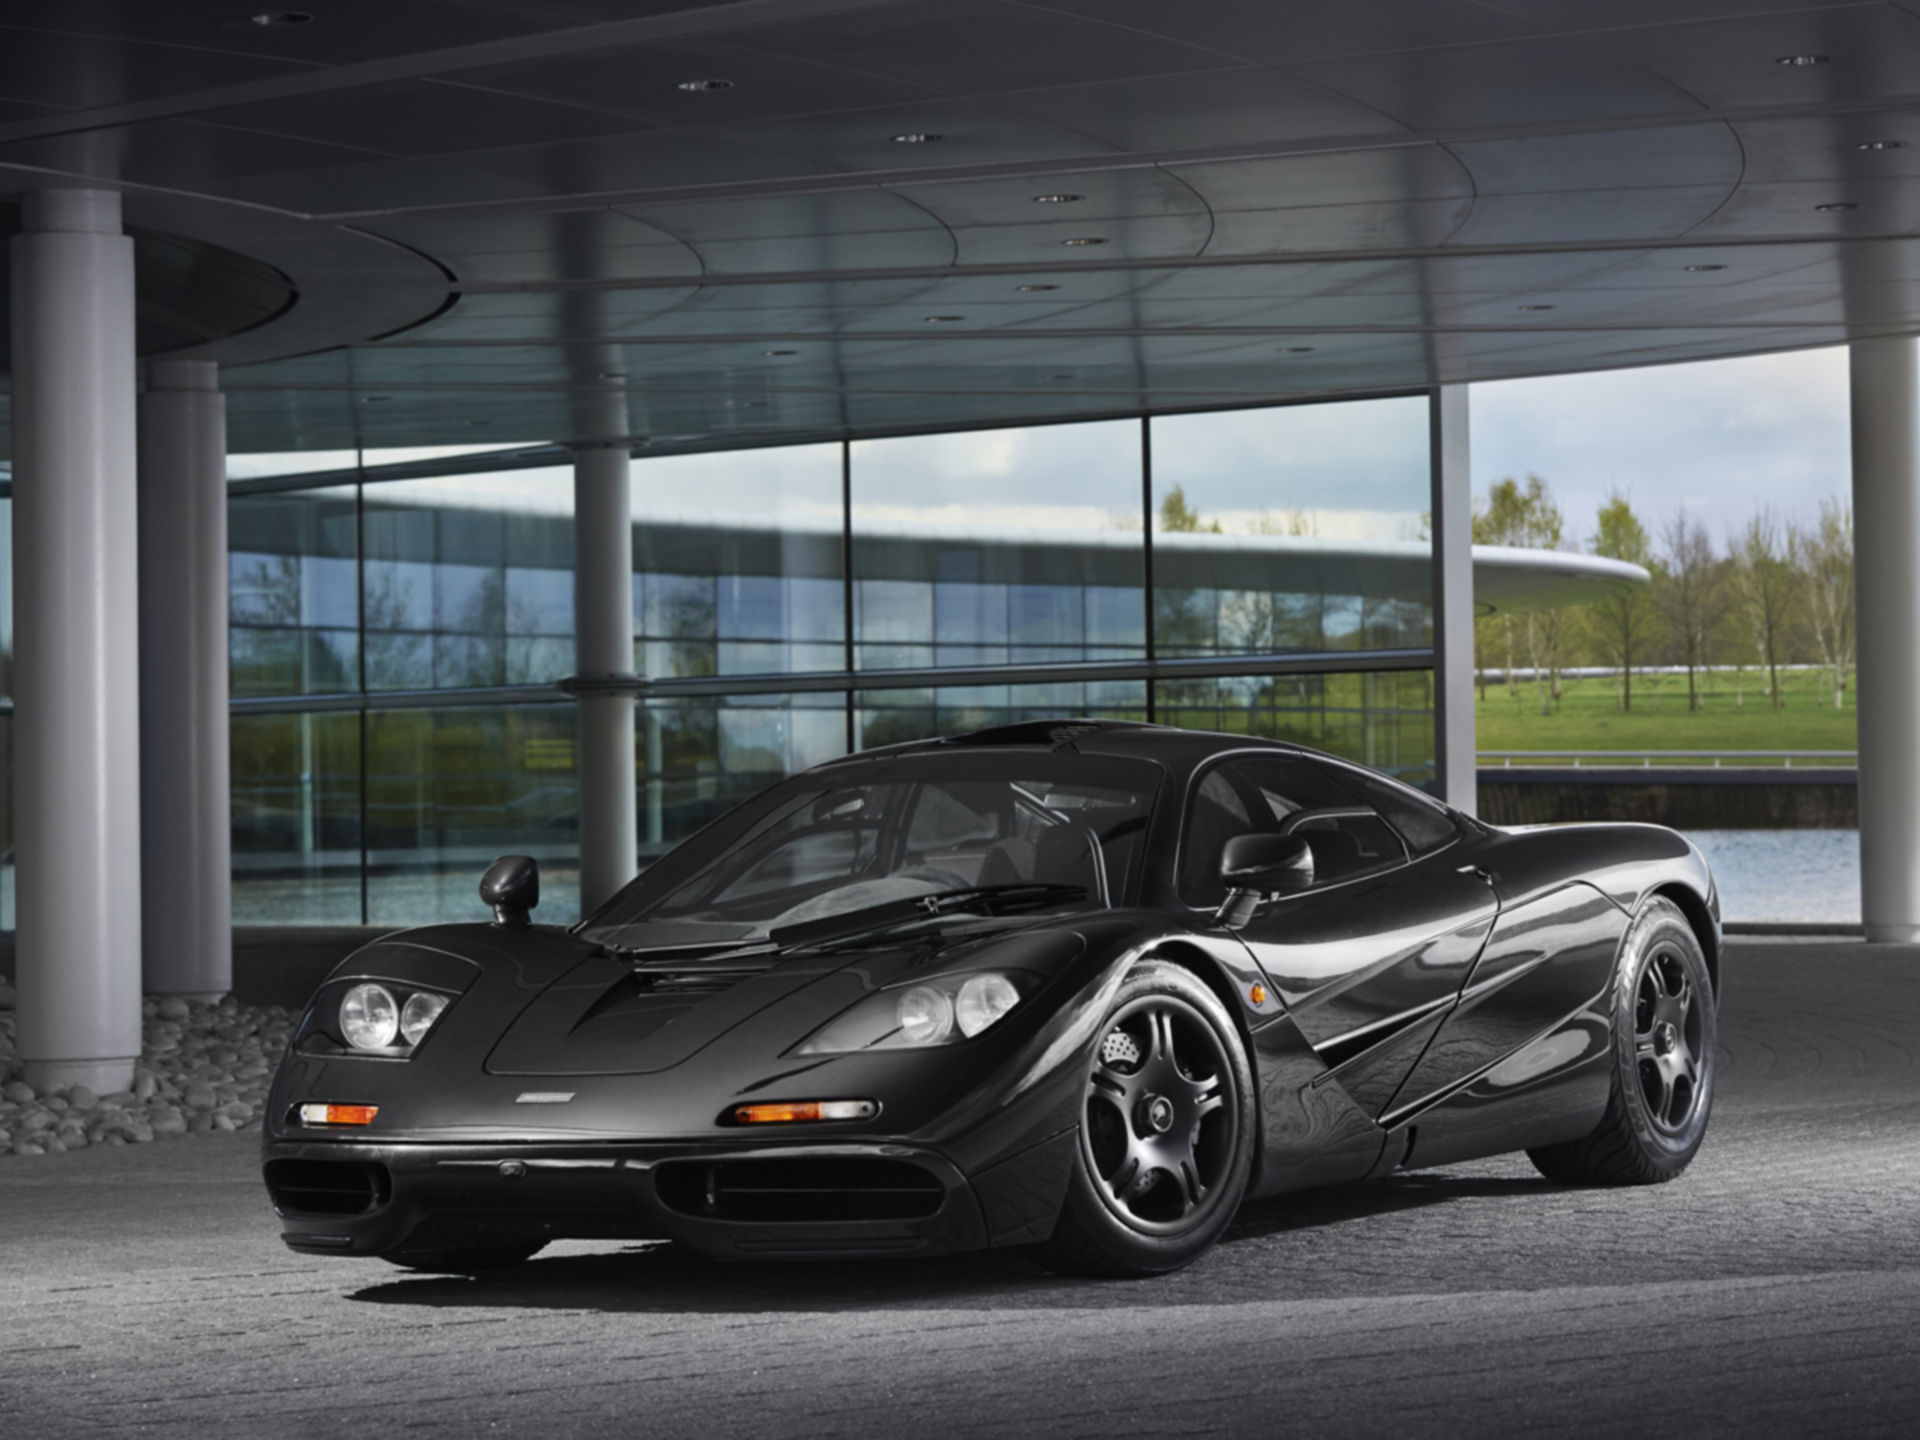 What Made the McLaren F1 the World's Greatest Car